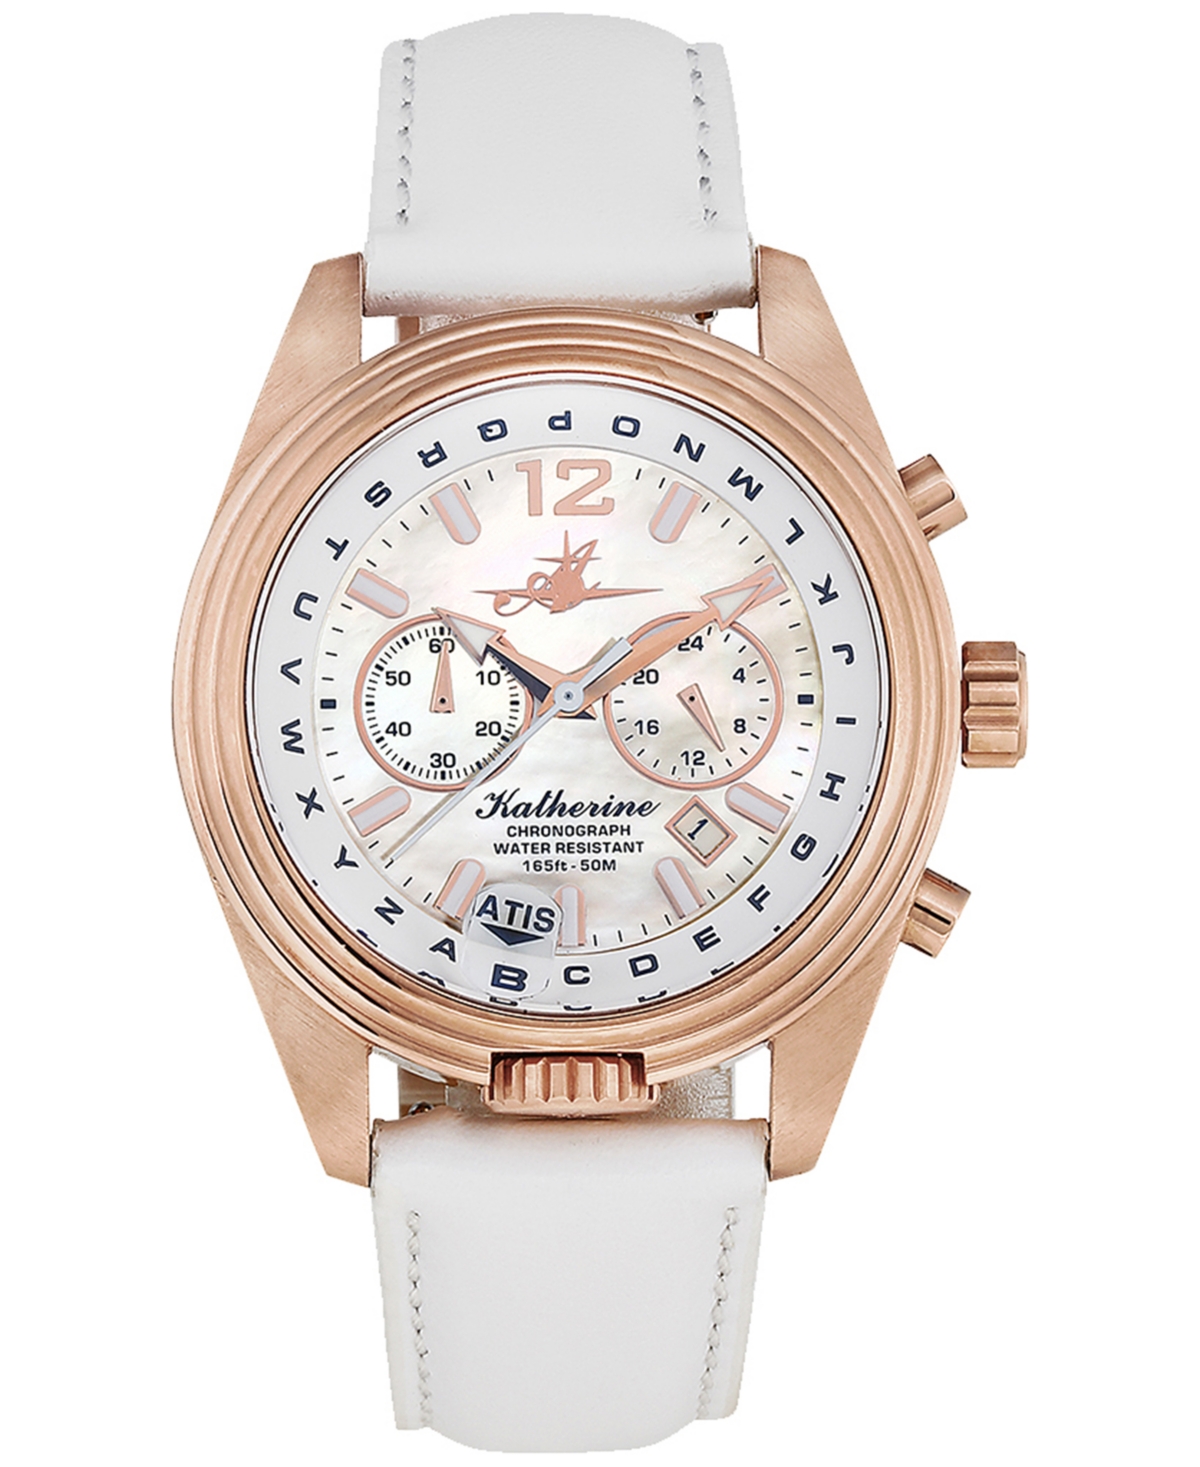 Abingdon Co. Katherine Women's Chronograph White Leather Strap Watch 40mm In Pearl White